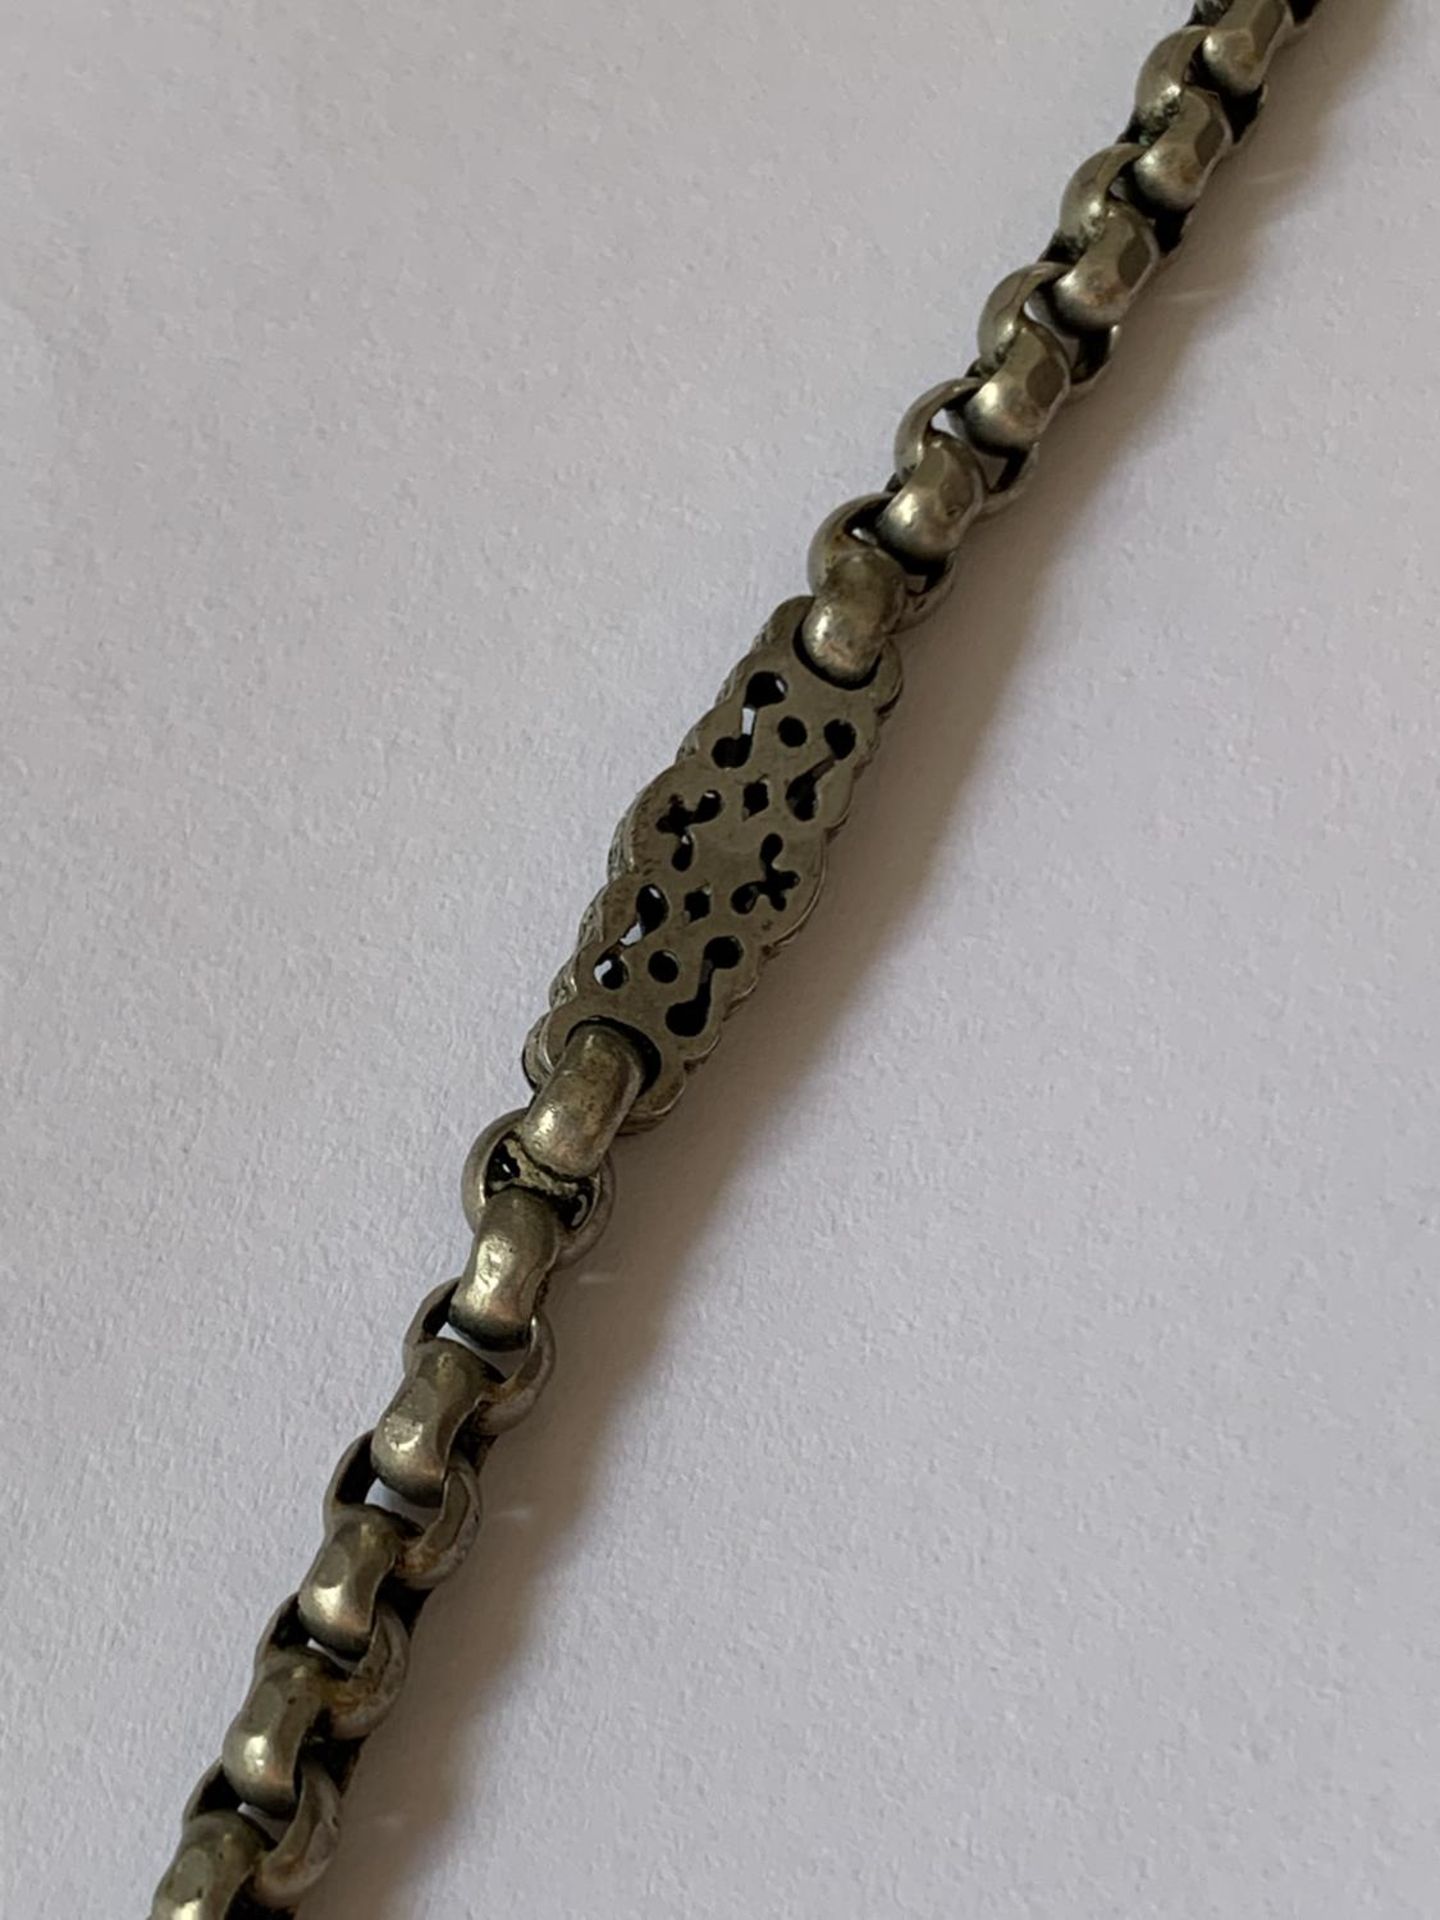 AN ORNATE HALF ALBERT WATCH CHAIN WITH FOB - Image 4 of 4